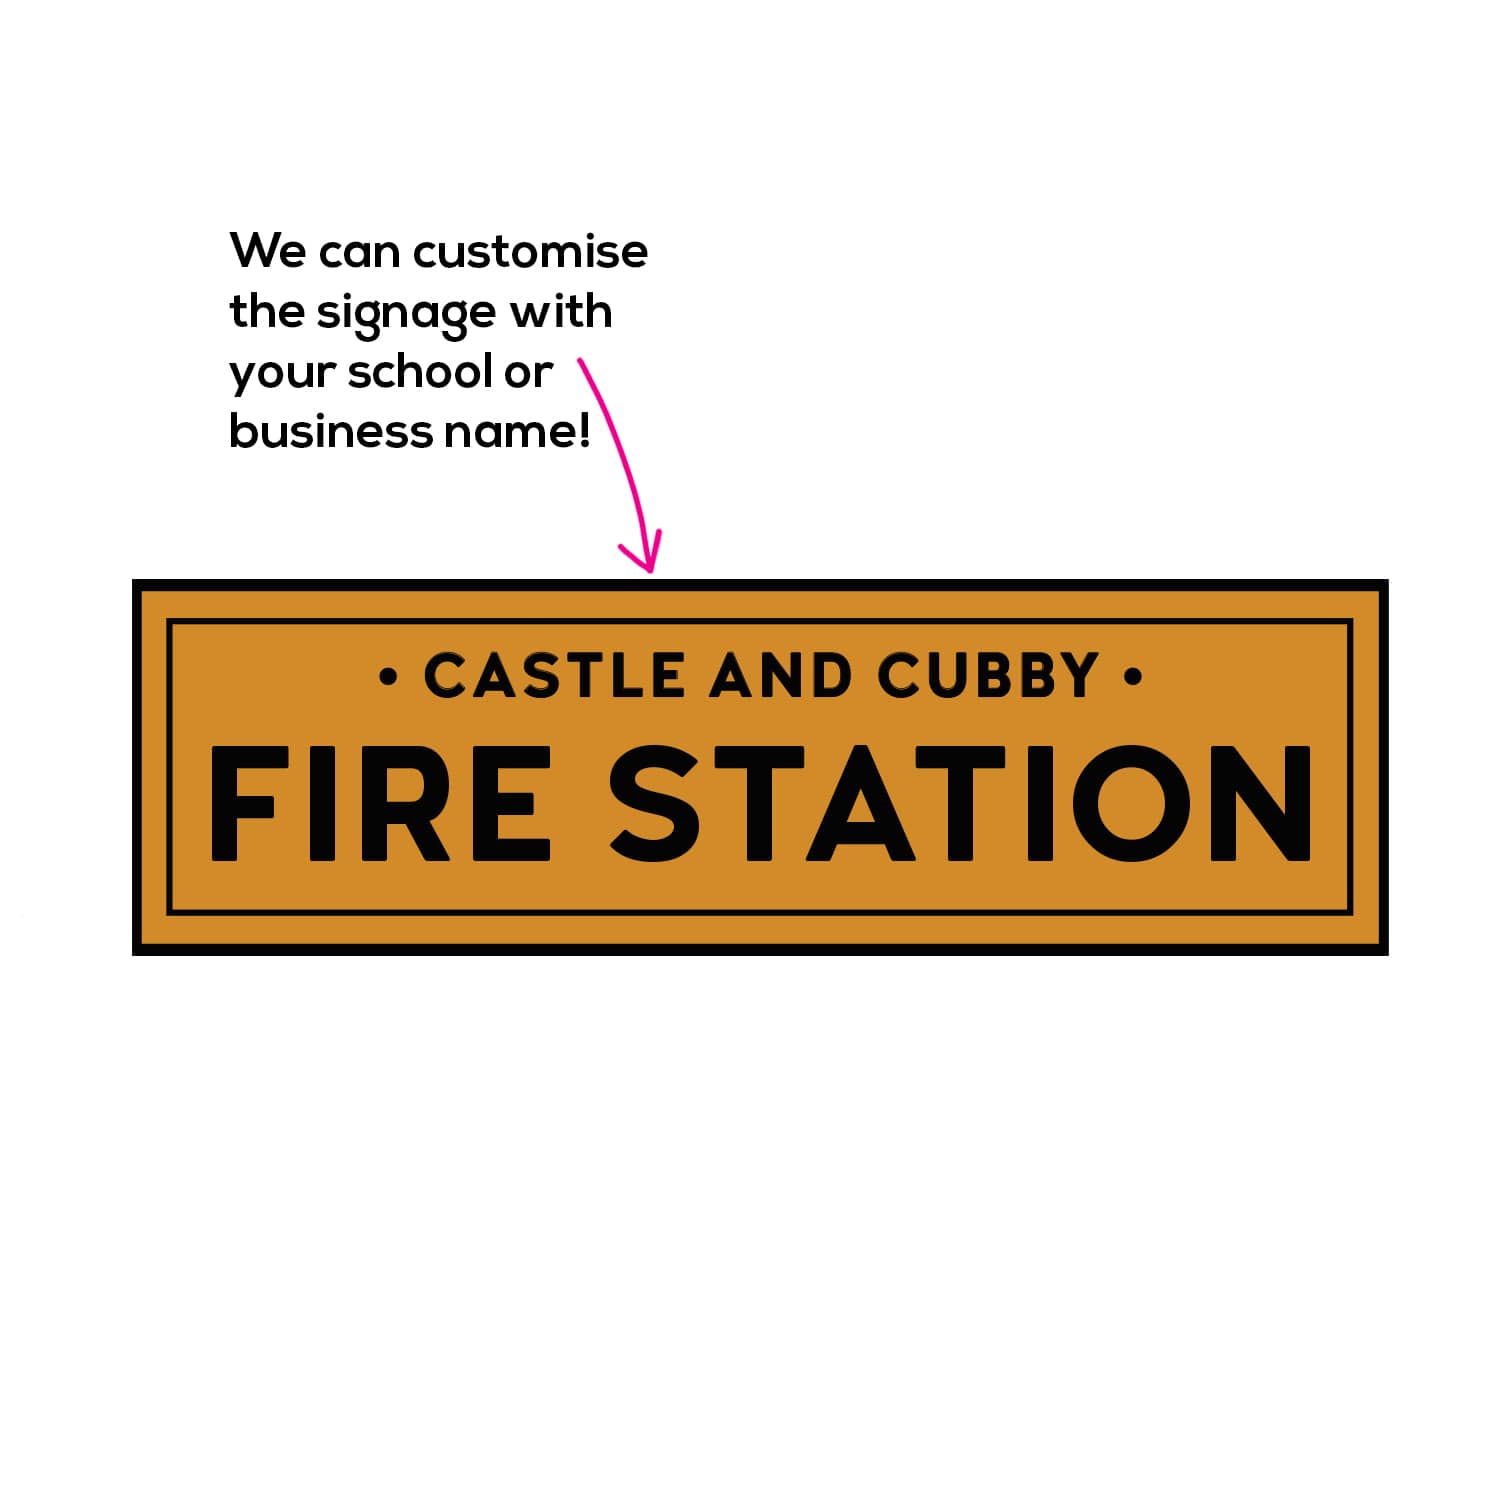 Fire station signage for little rectangle